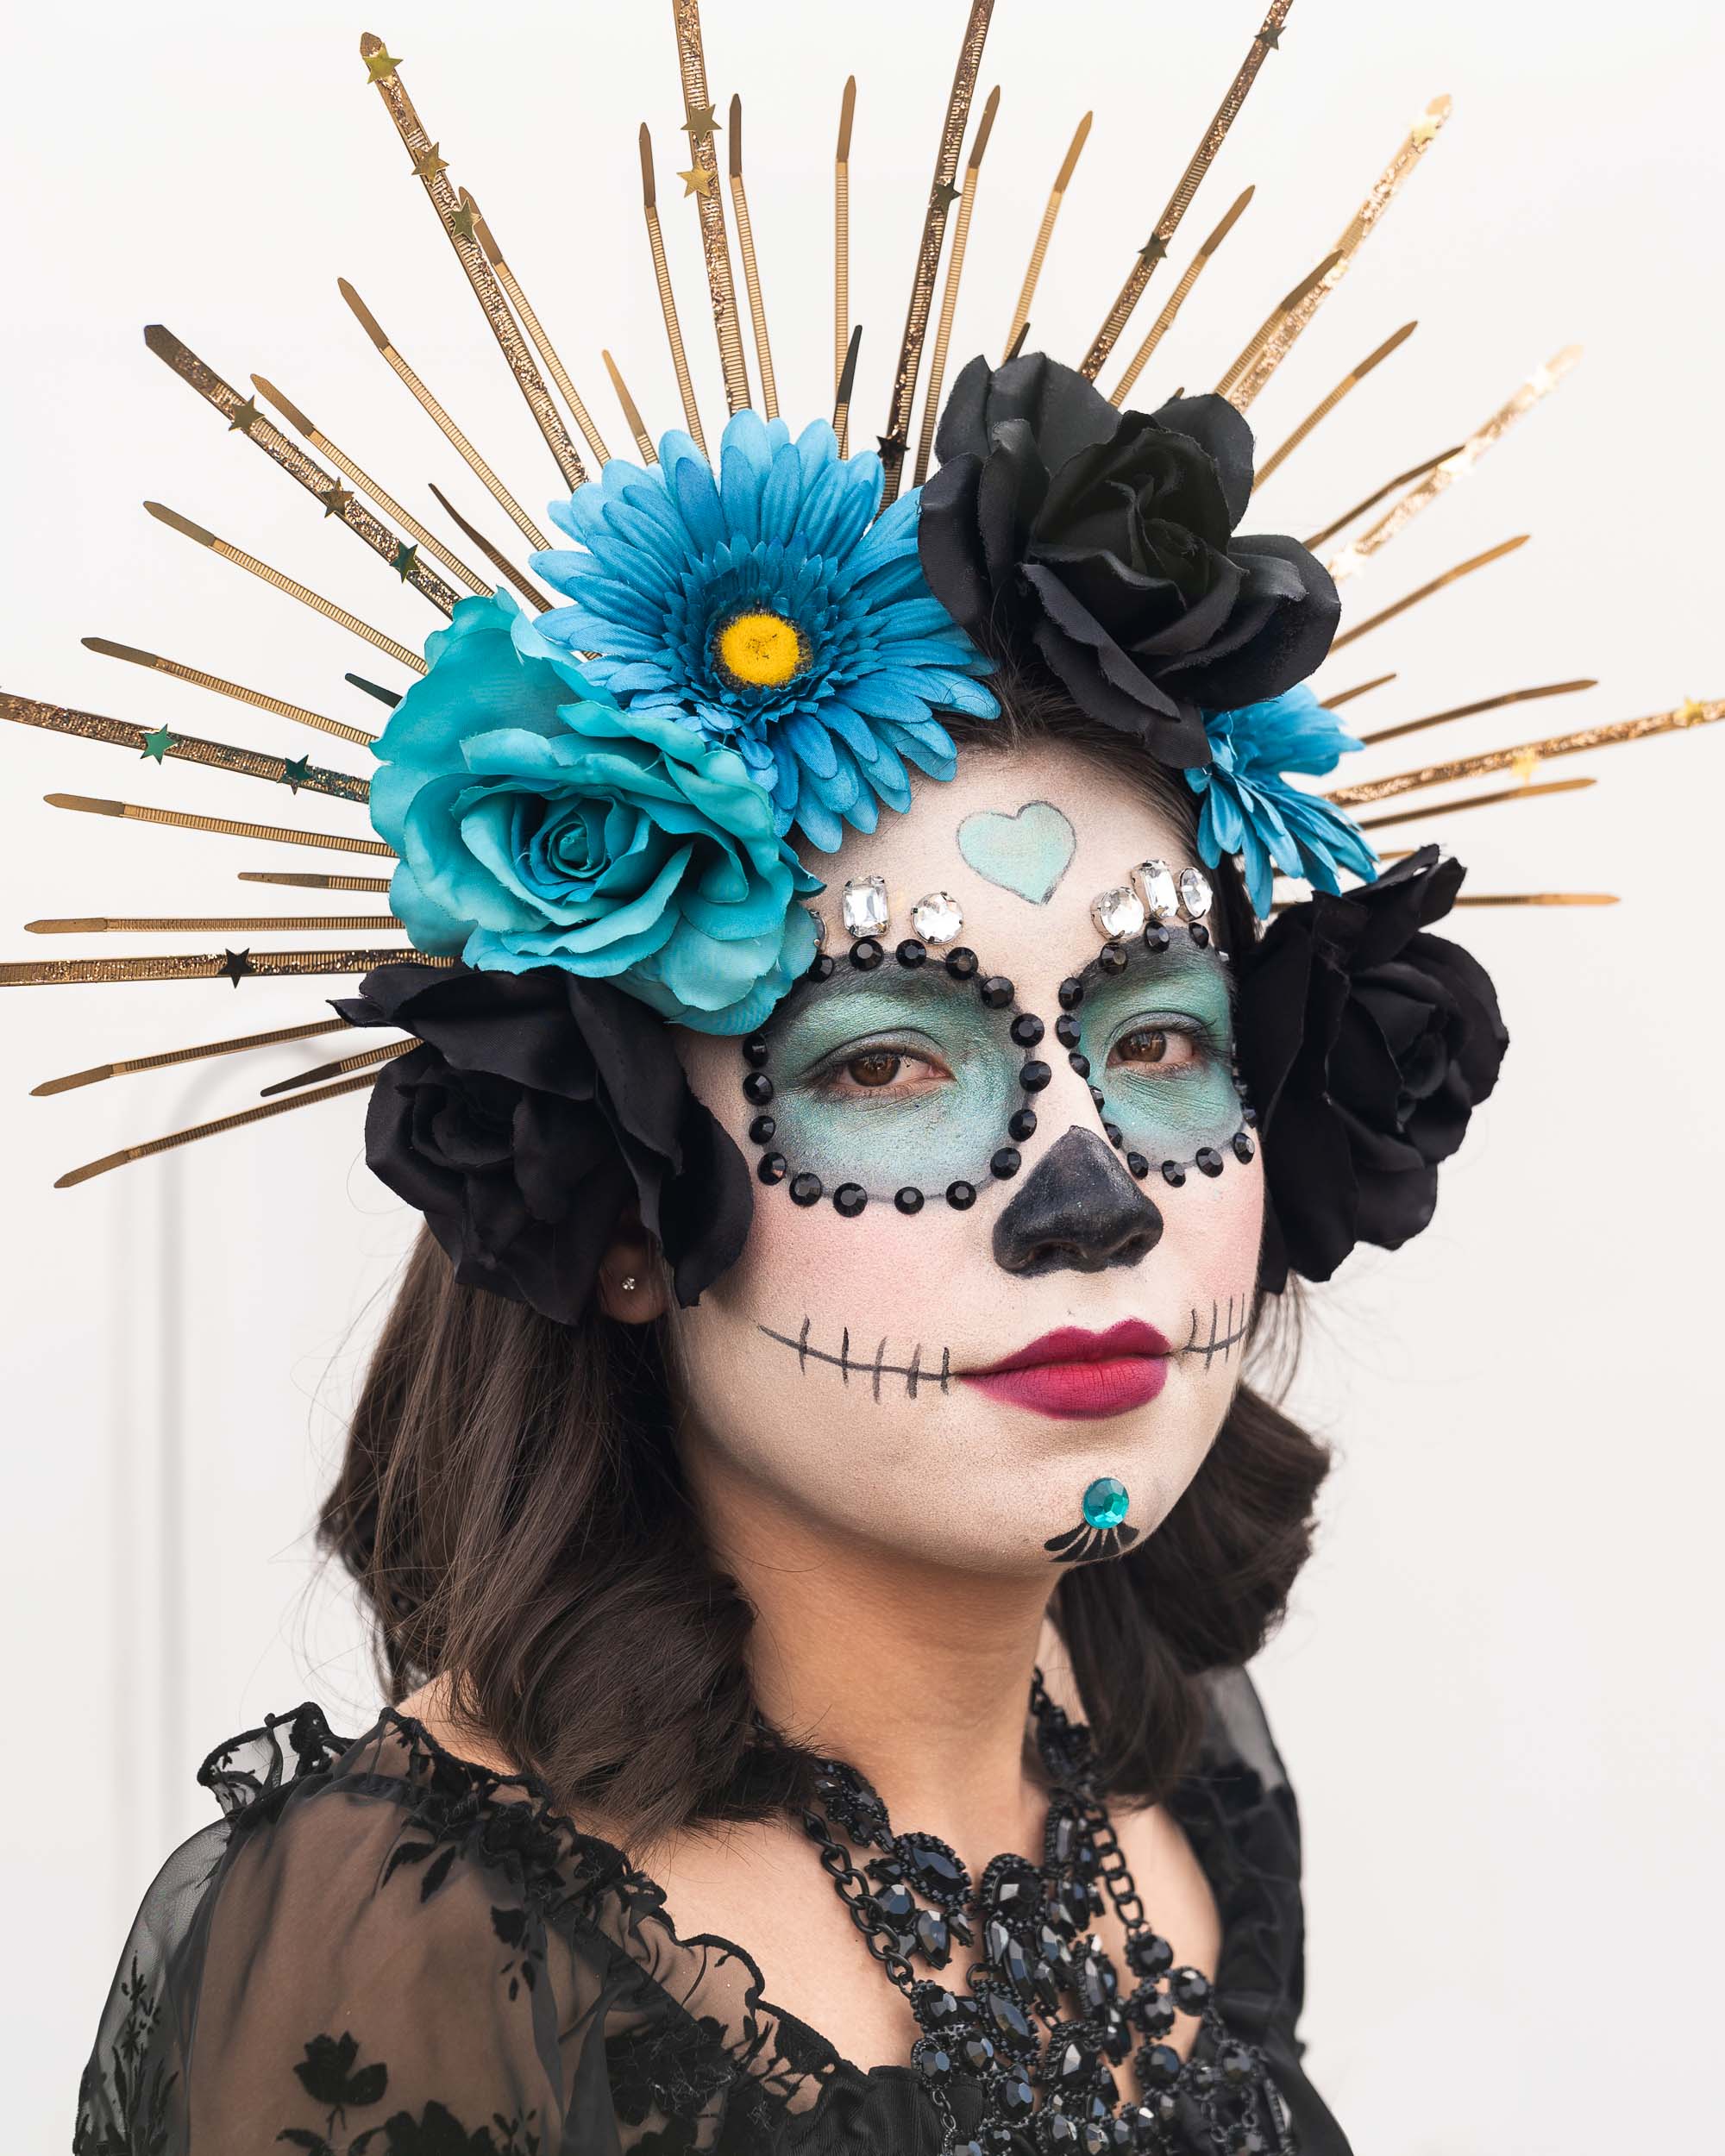 Jeff Bynum Photo | Day of the Dead